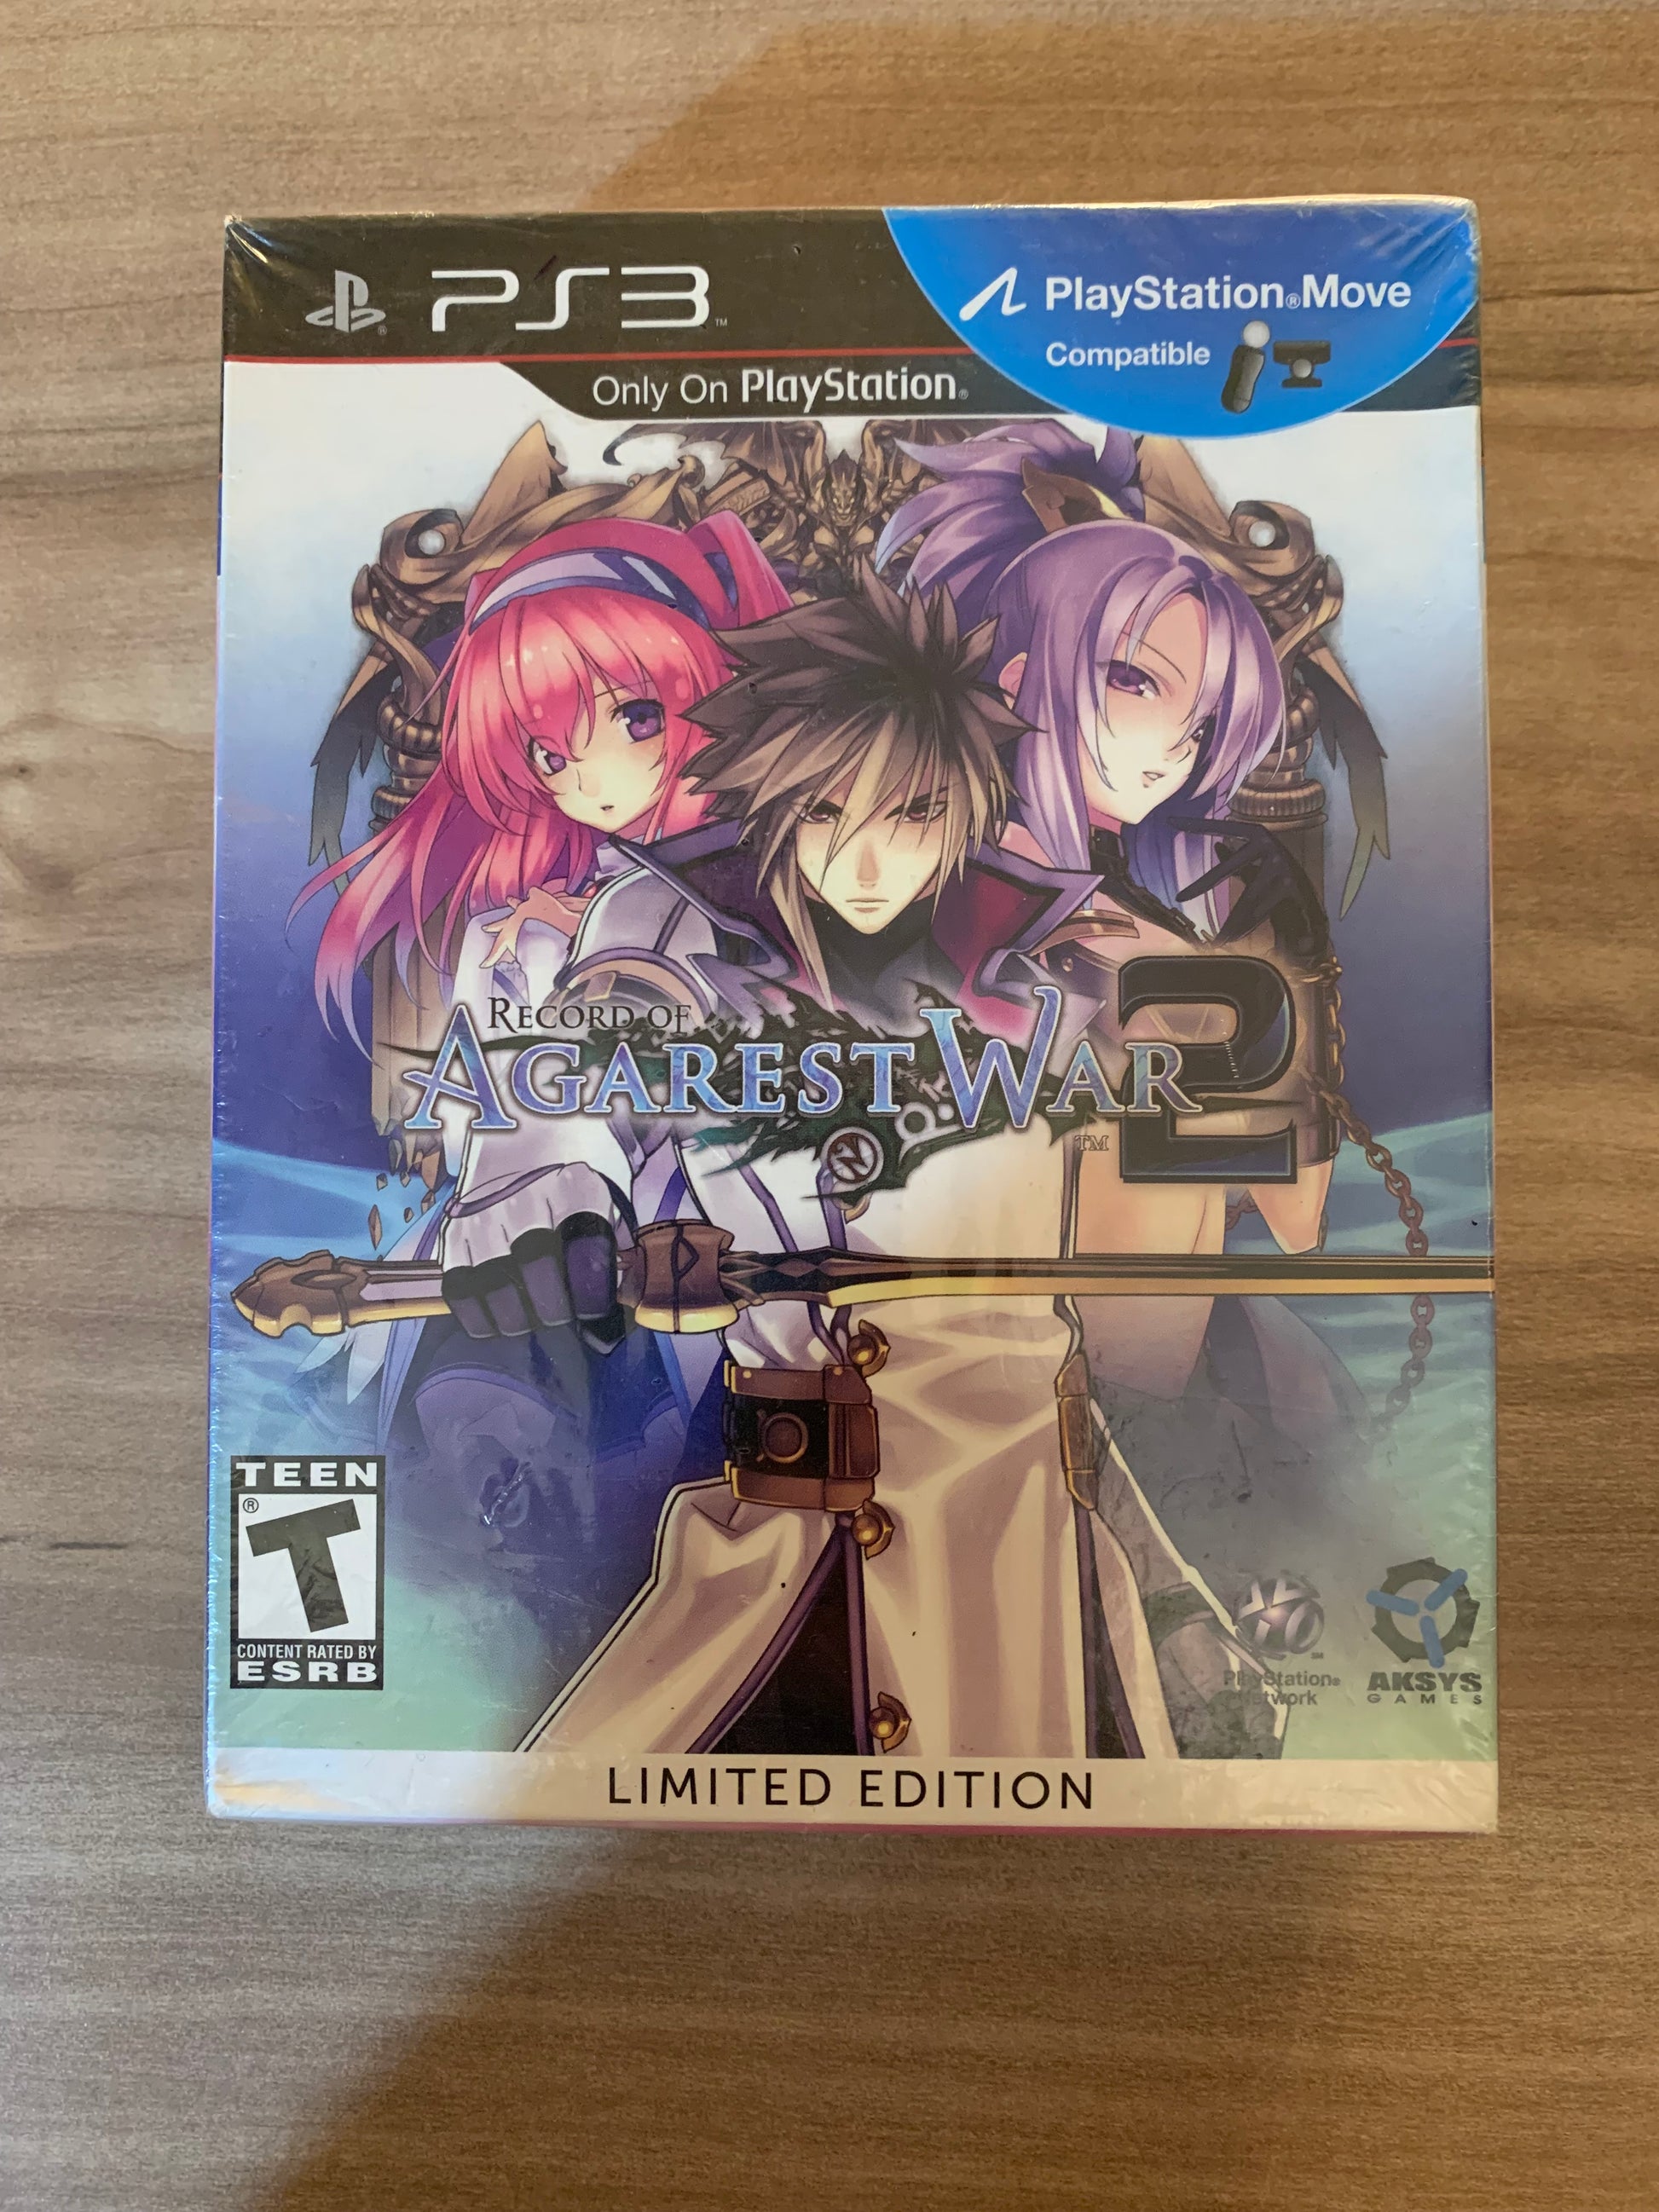 PiXEL-RETRO.COM : SONY PLAYSTATION 3 (PS3) COMPLET CIB BOX MANUAL GAME NTSC RECORD OF AGAREST WAR 2 NEW SEALED